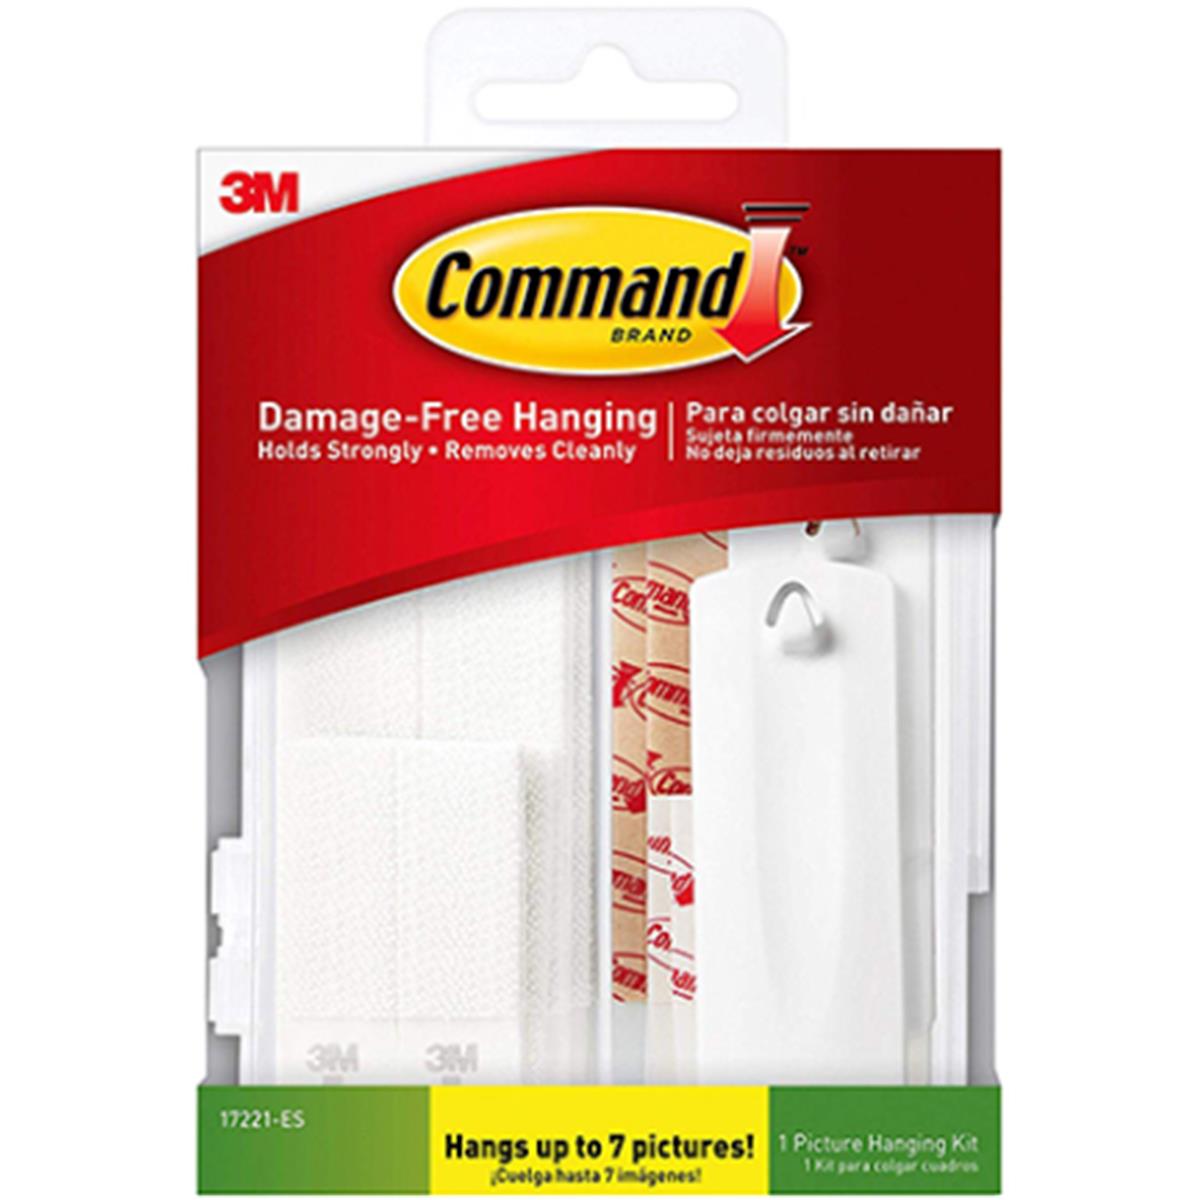 17221-es Command Picture Hanging Kit, White - Piece Of 24